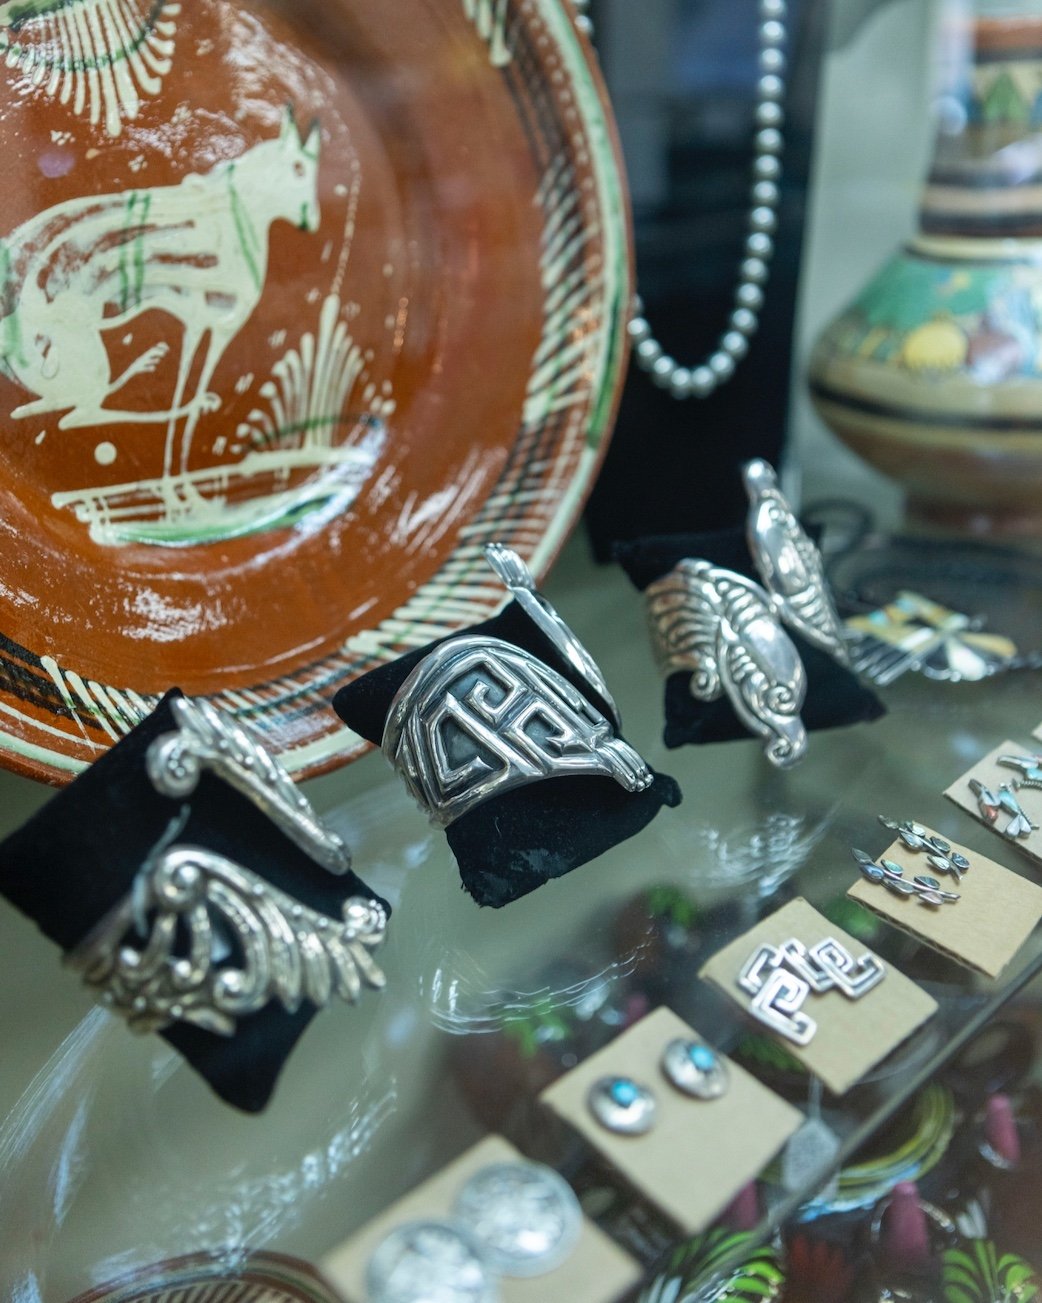 #SterlingSilver is always in style. 🪙 If you haven&rsquo;t been in to see us in a while, stop by and enjoy free parking while you shop!⠀
⠀
#AntiqueShop #Antiquing #VintageLove